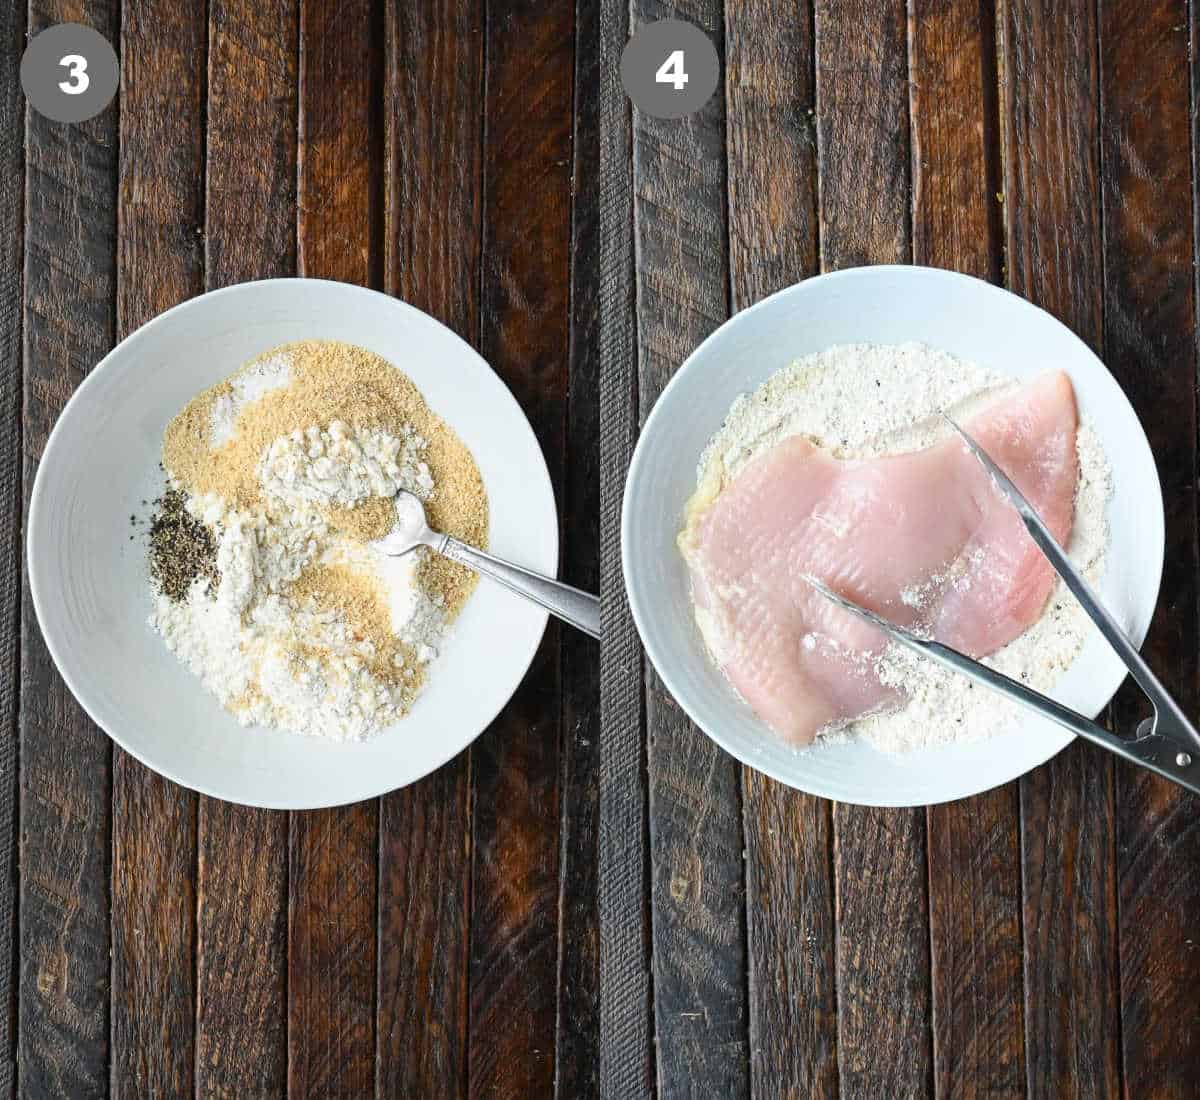 Flour and seasoning mixed together in a bowl then the chicken breasts tossed in flour coating.